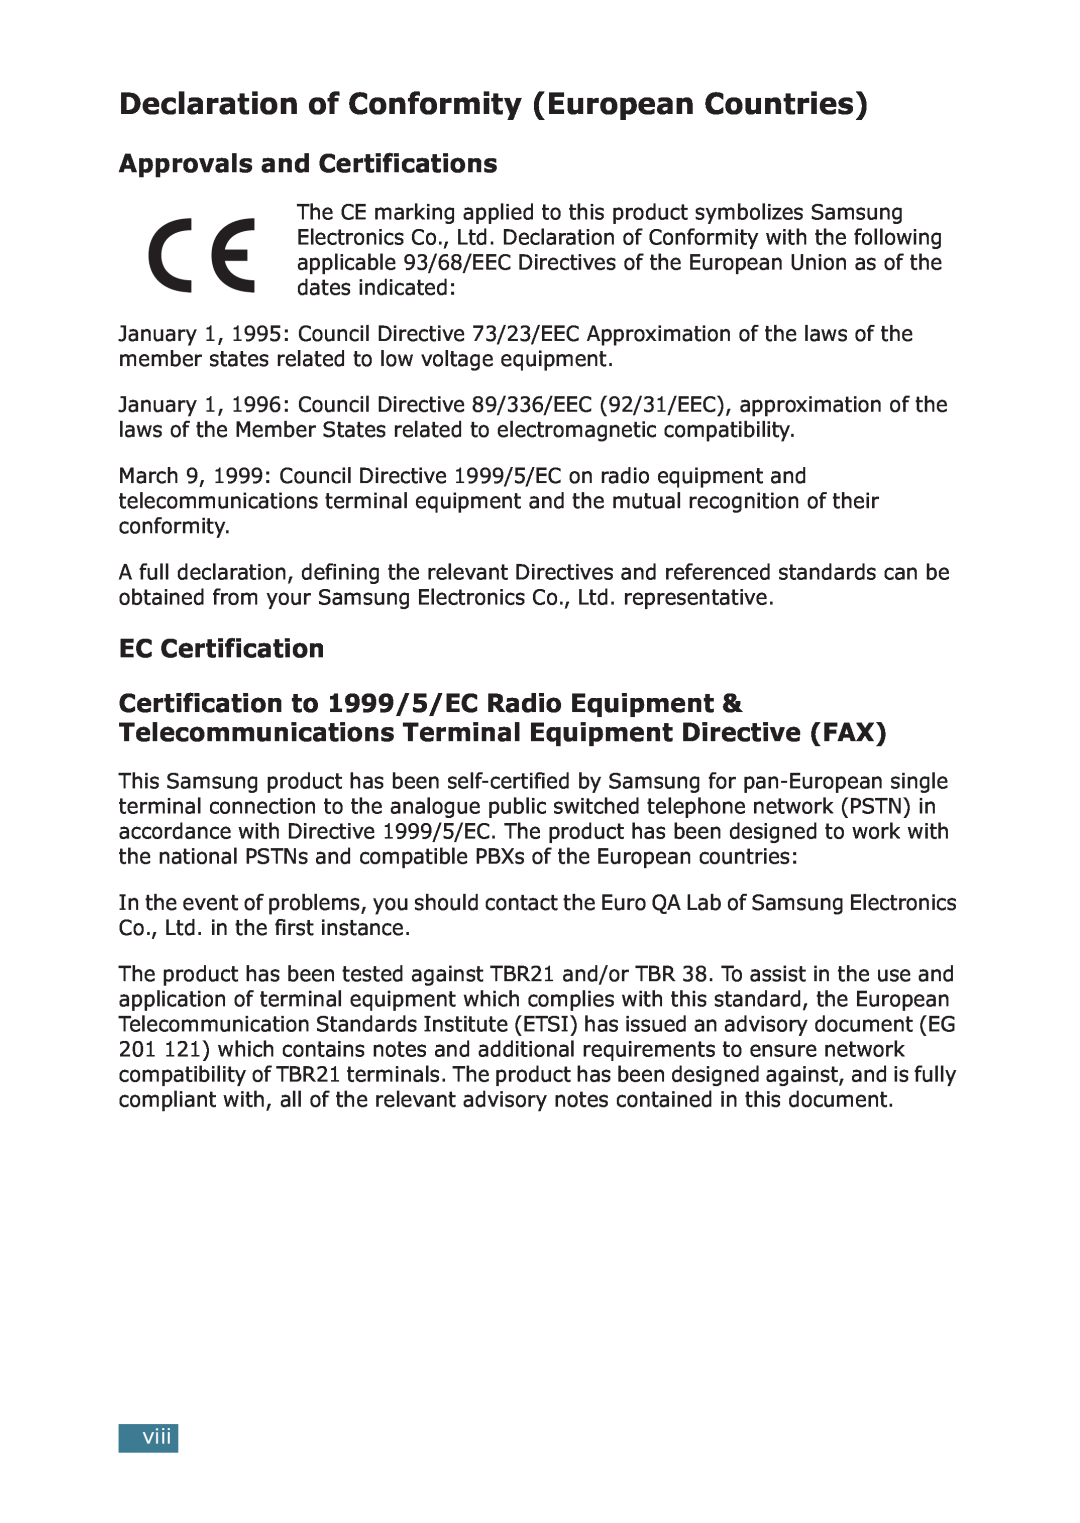 Samsung ML-1710P manual Declaration of Conformity European Countries, Approvals and Certifications, EC Certification, viii 